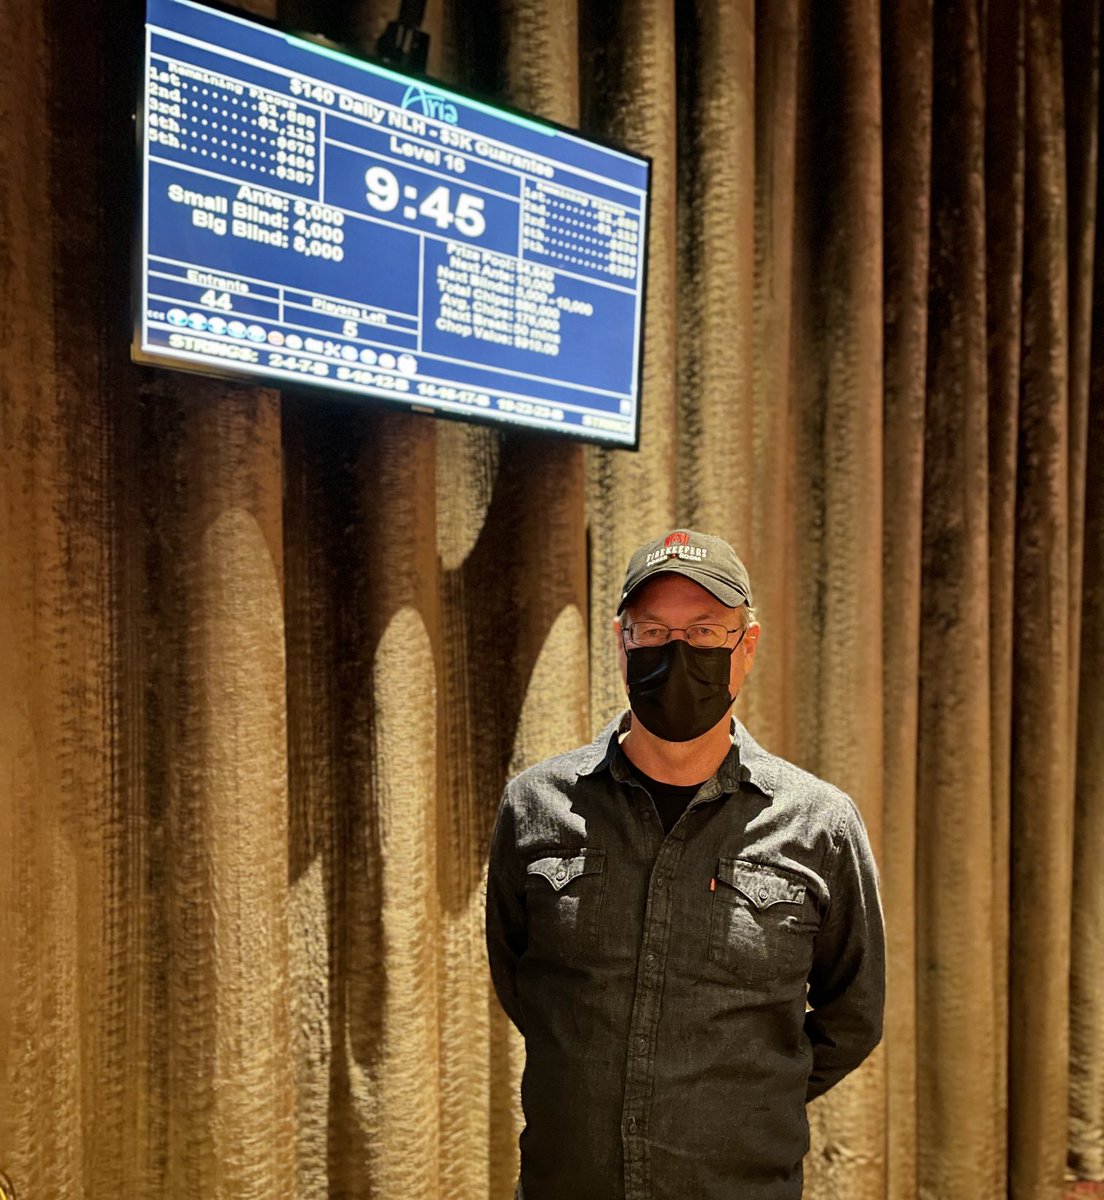 Congratulations to Timothy Robl on his 1st place win! That makes 2 first place wins in 3 days! I’m guessing we know where Andrew got all his skills from! 🏆😉 Join us daily ⁦@ARIAPoker⁩ 1pm $3,000 Guaranteed, $140 buy-in, 20k starting stack 20 min levels ♦️♠️♥️♣️